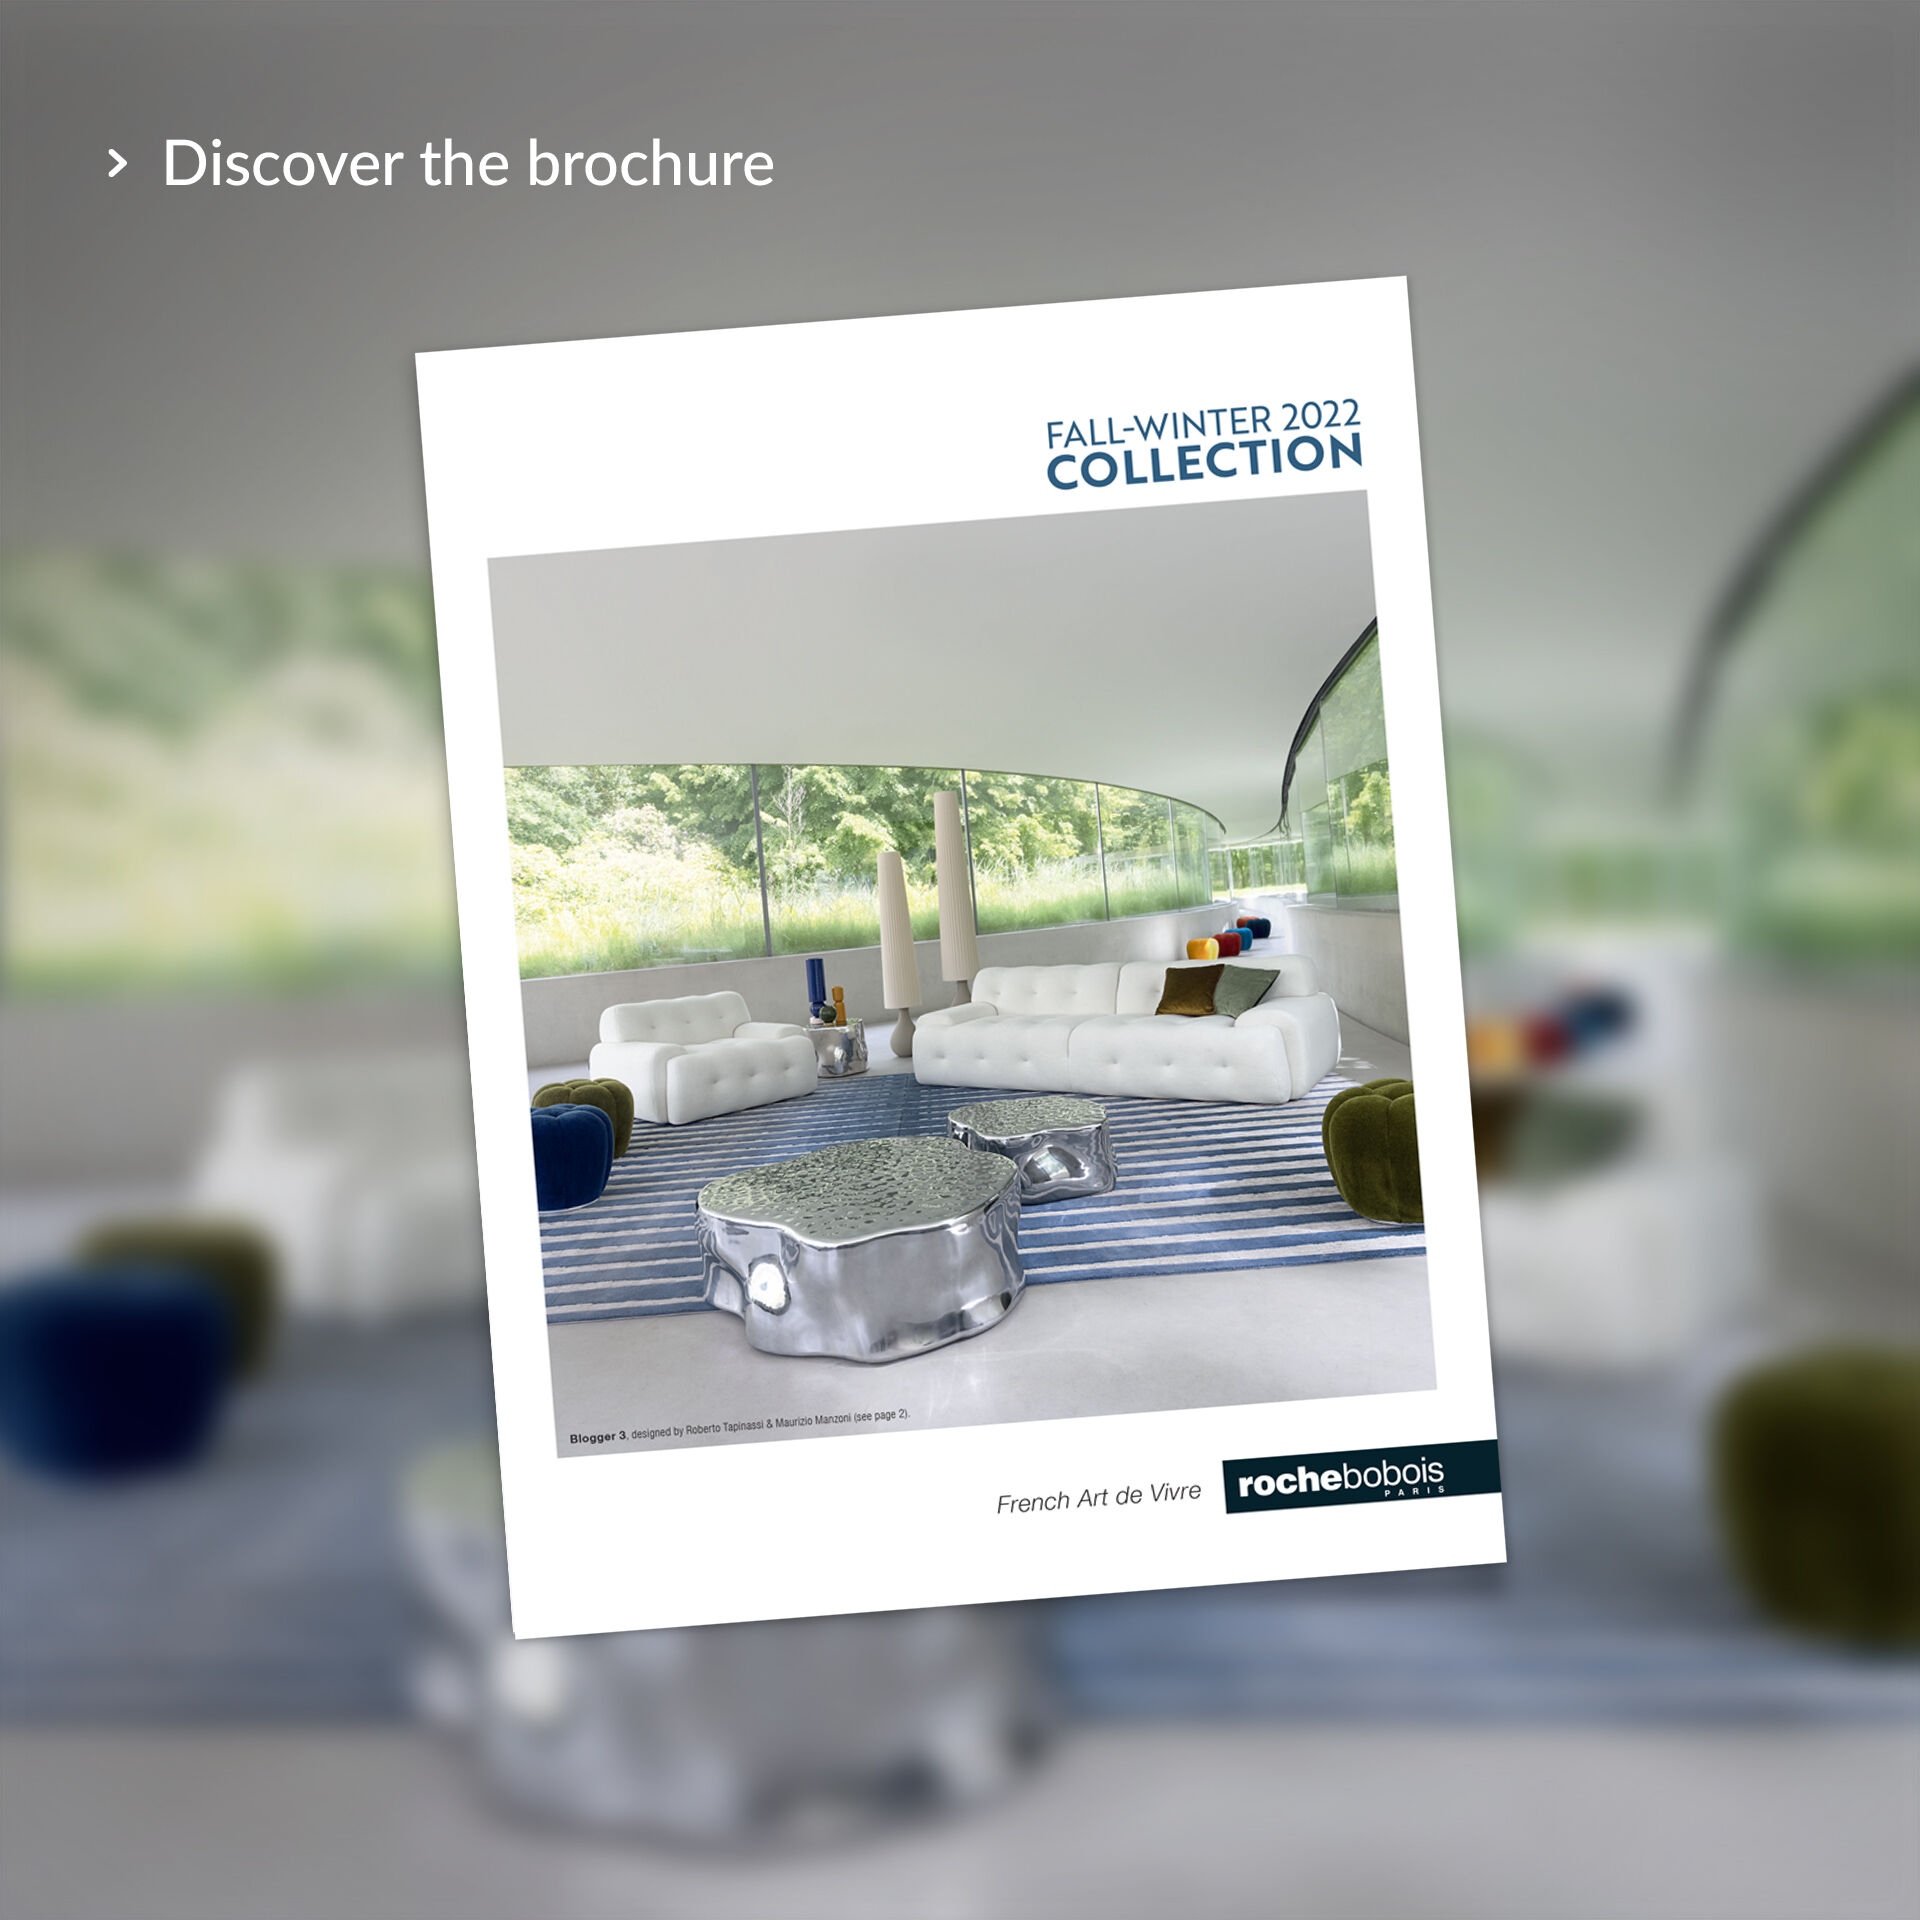 Discover the brochure